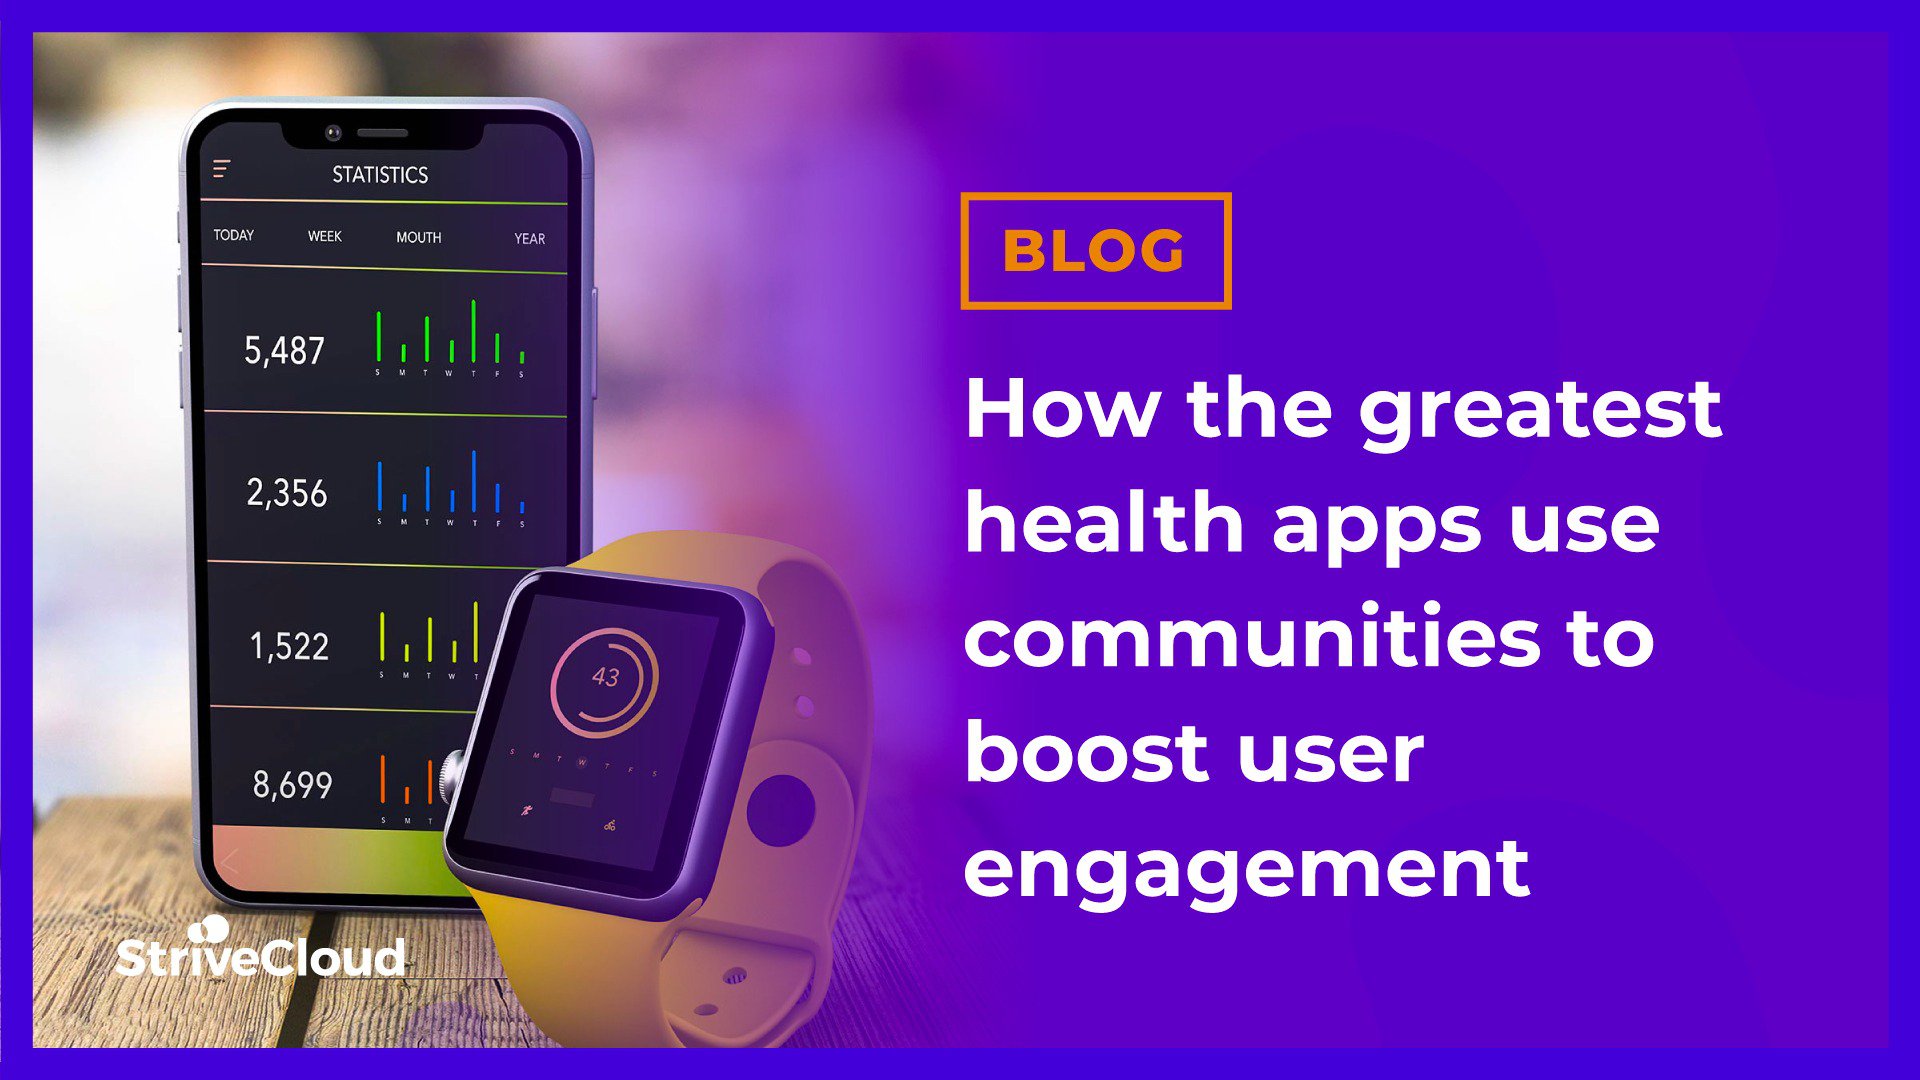 How to greatest health apps use communities to boost user engagement